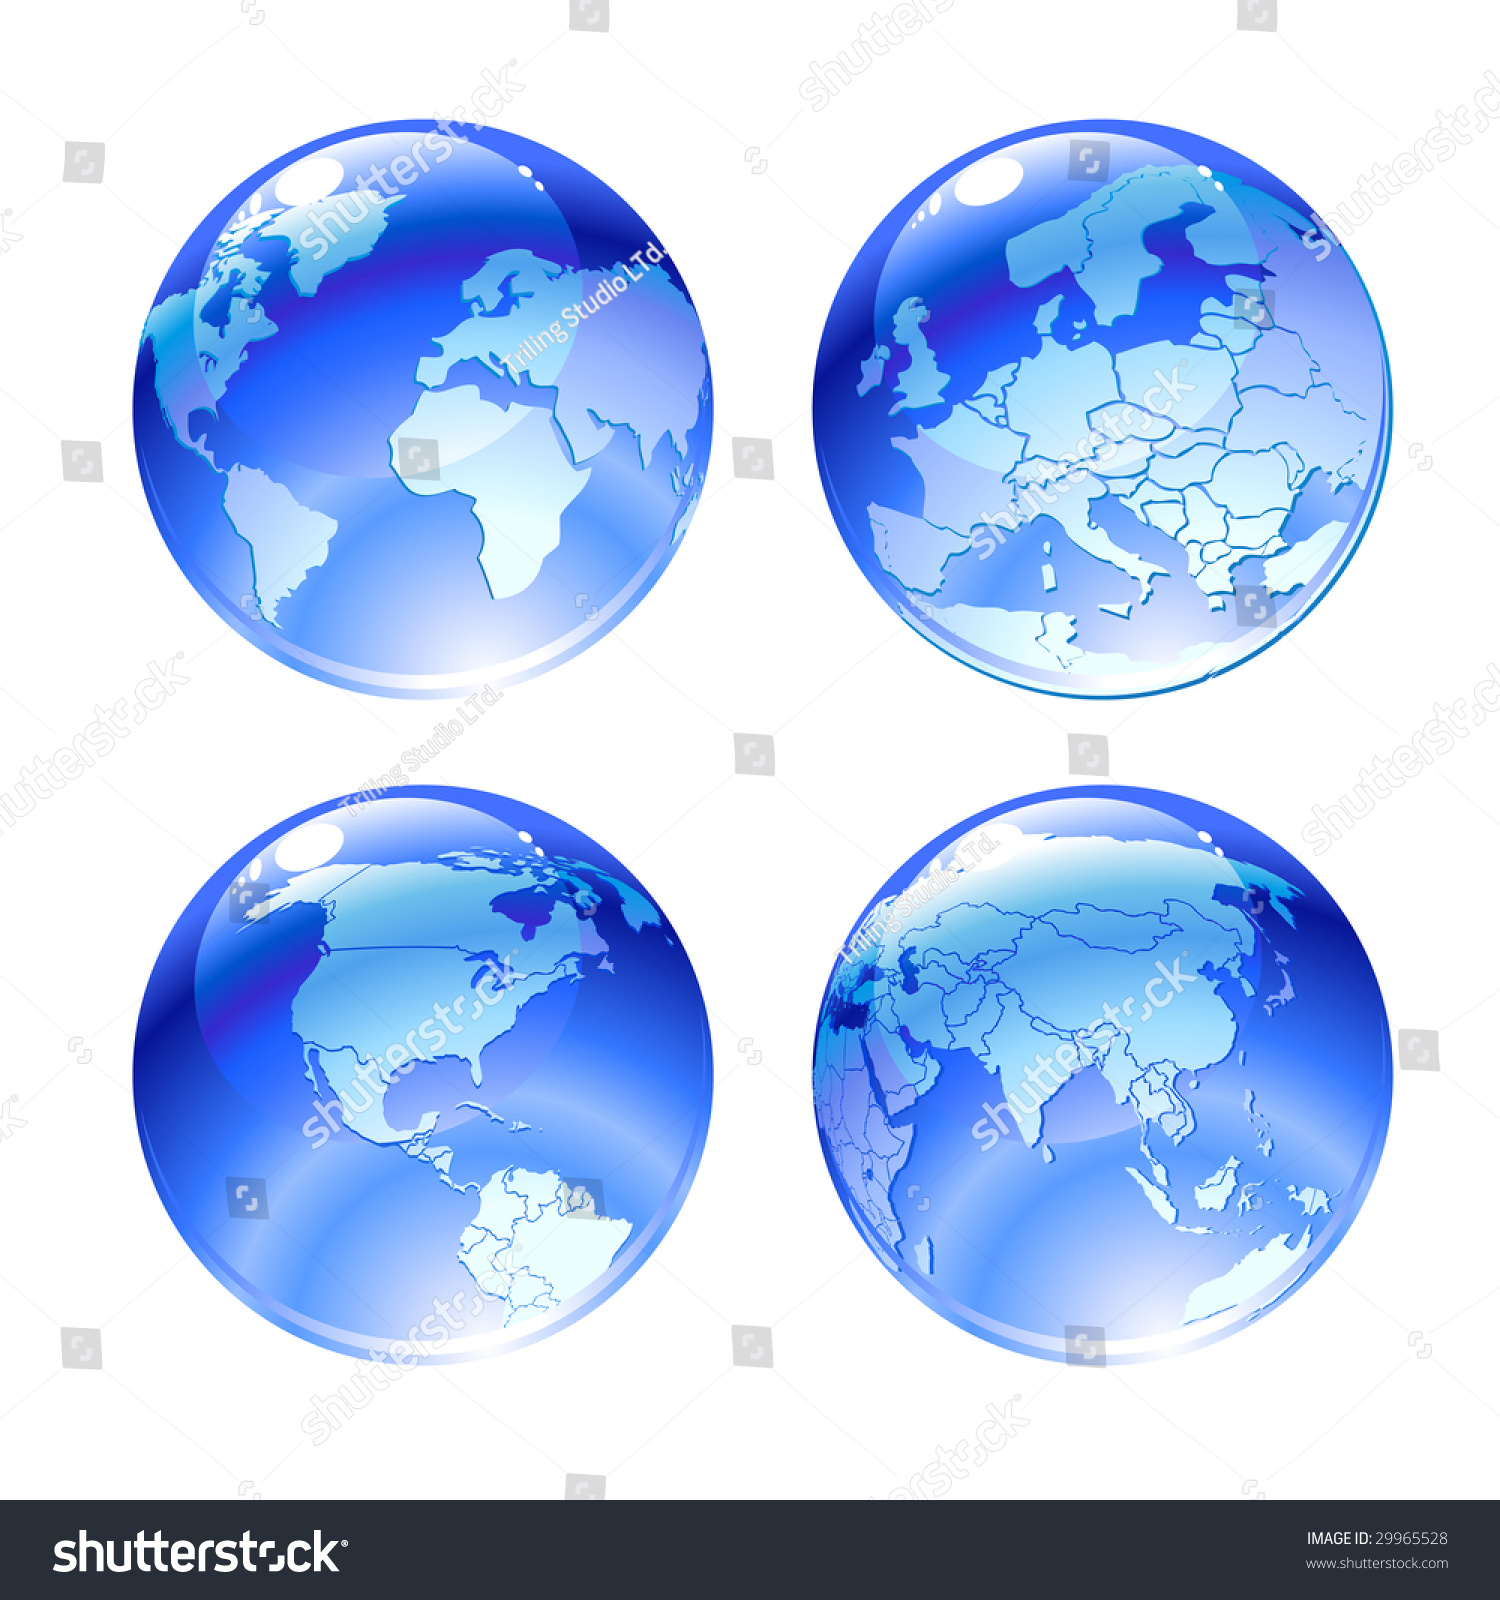 Vector Illustration Globe Icons Different Continents Stock Vector ...